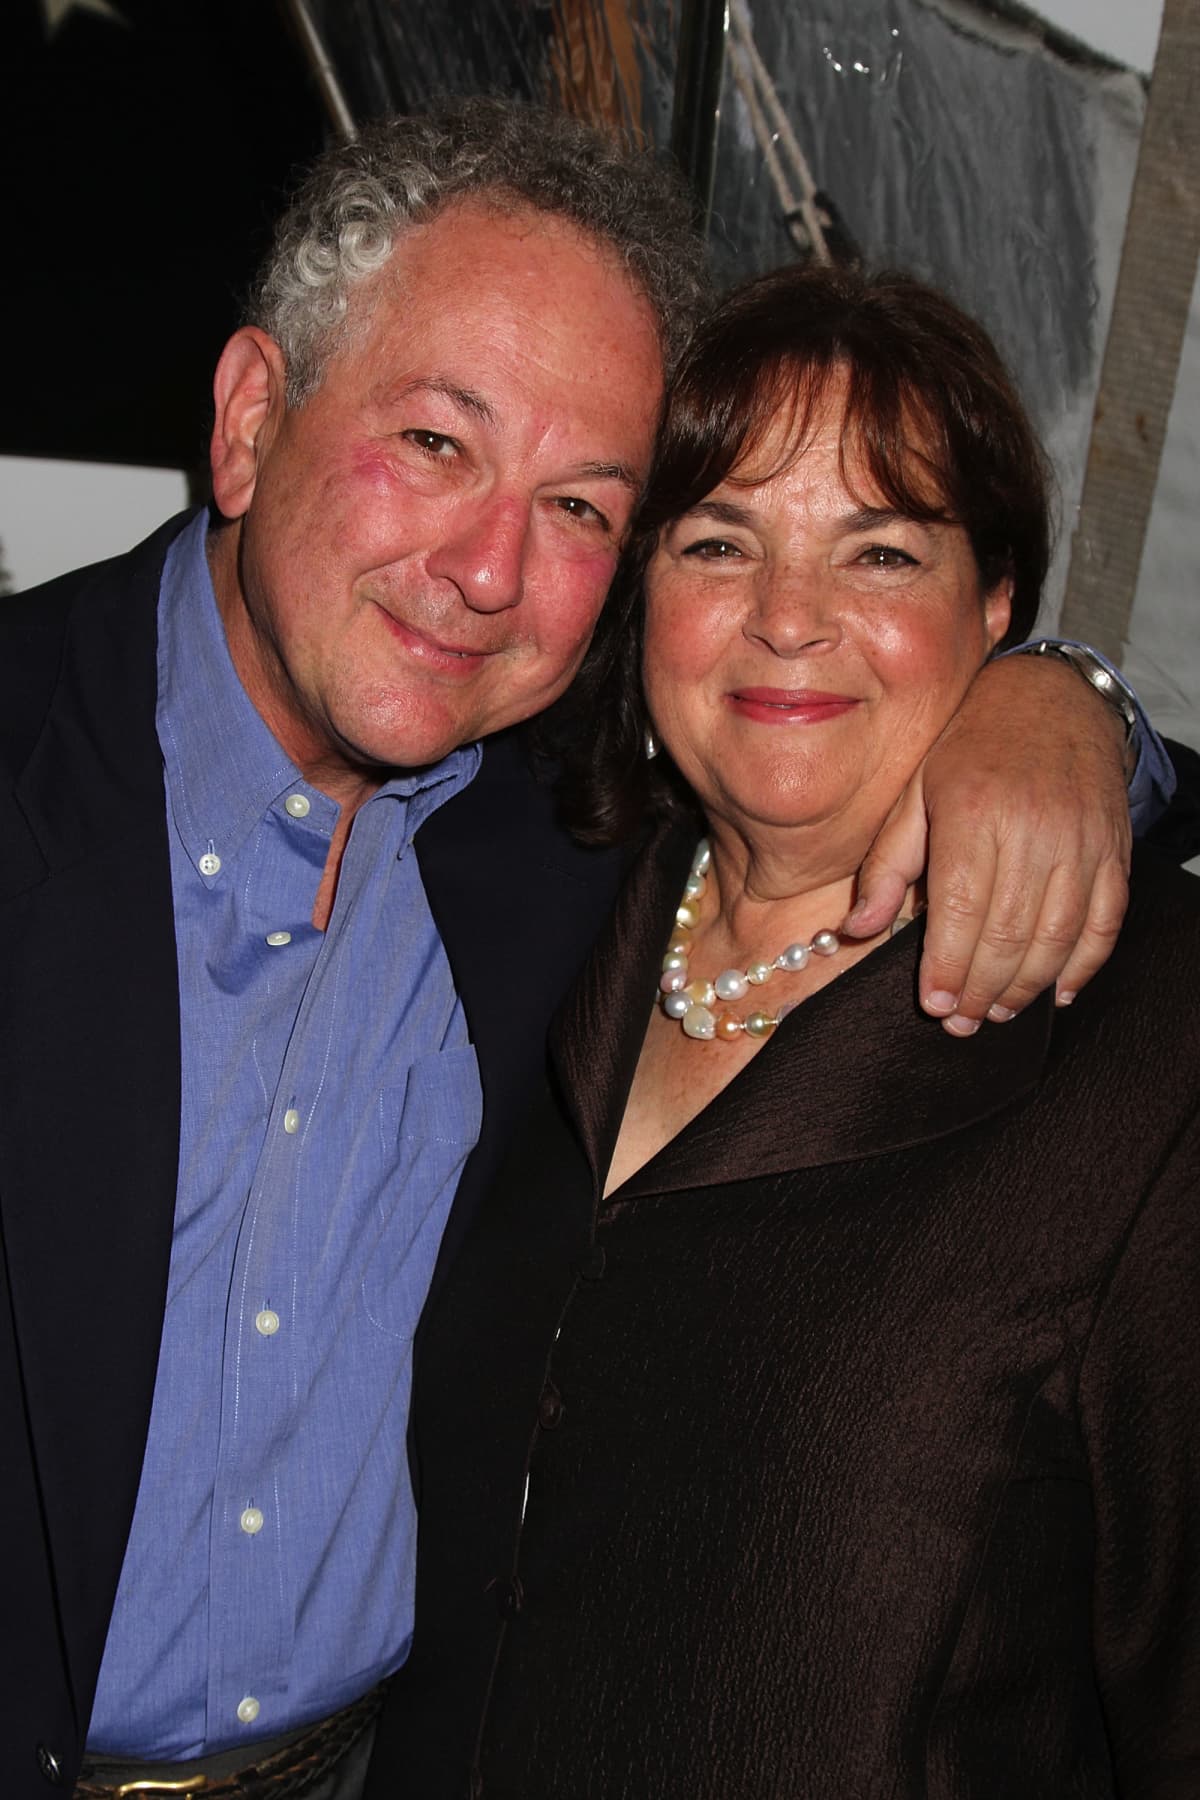 SAGAPONACK, NY - JUNE 25:  Jeffrey and Ina Garten attend the "Barefoot Under the Stars" event at the Wolffer Estate Vineyard on June 25, 2011 in Sagaponack, New York.  (Photo by Sonia Moskowitz/Getty Images)